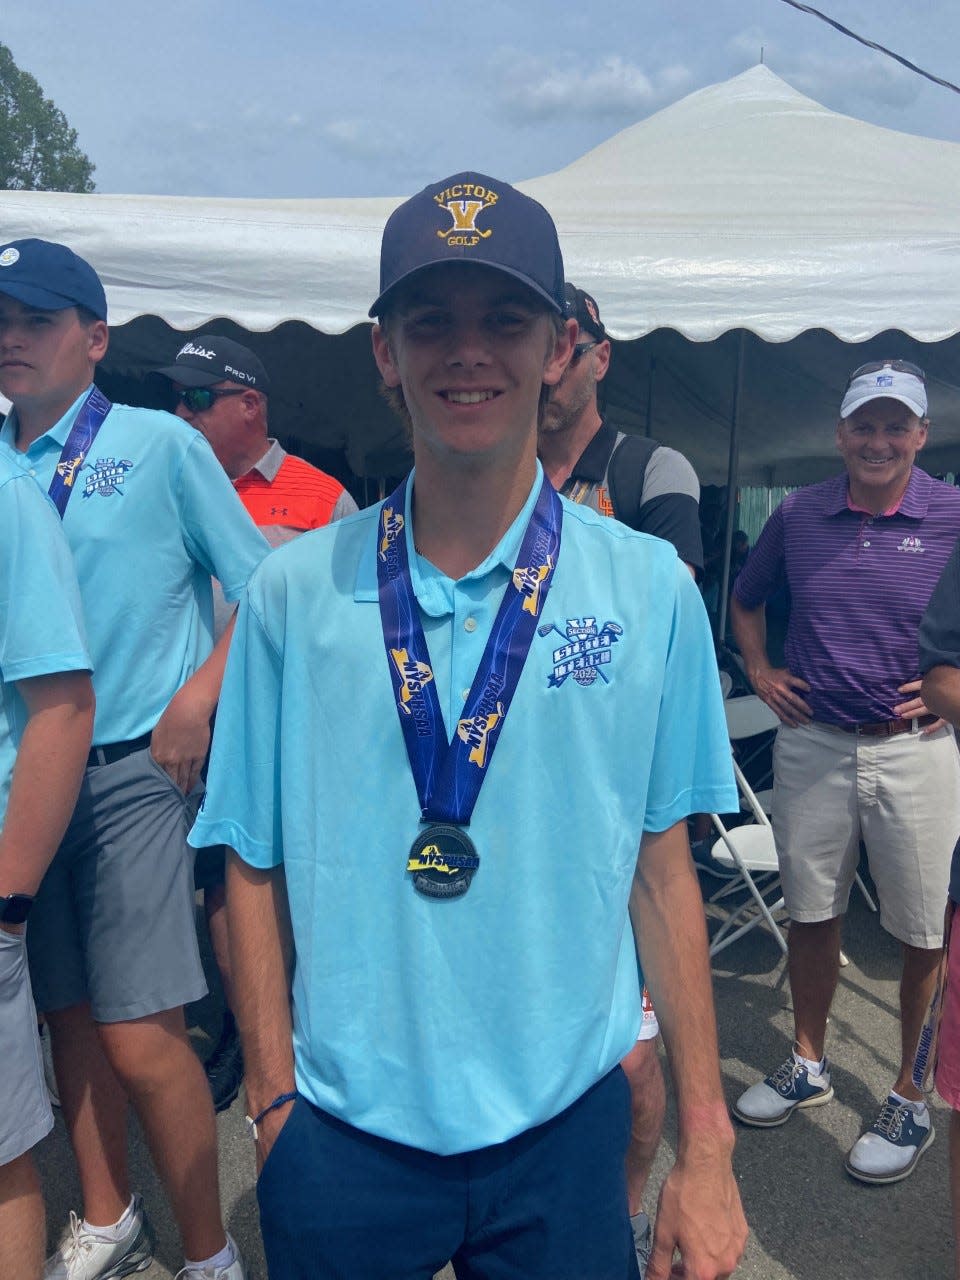 Victor senior Jack Berl shot an even par 144 for fourth overall at the NYSPHSAA Boys Golf Championships on Monday, June 6, 2022, in Elmira. The reigning AGR Golfer of the Year also helped Section V place second as a team at the state tournament.